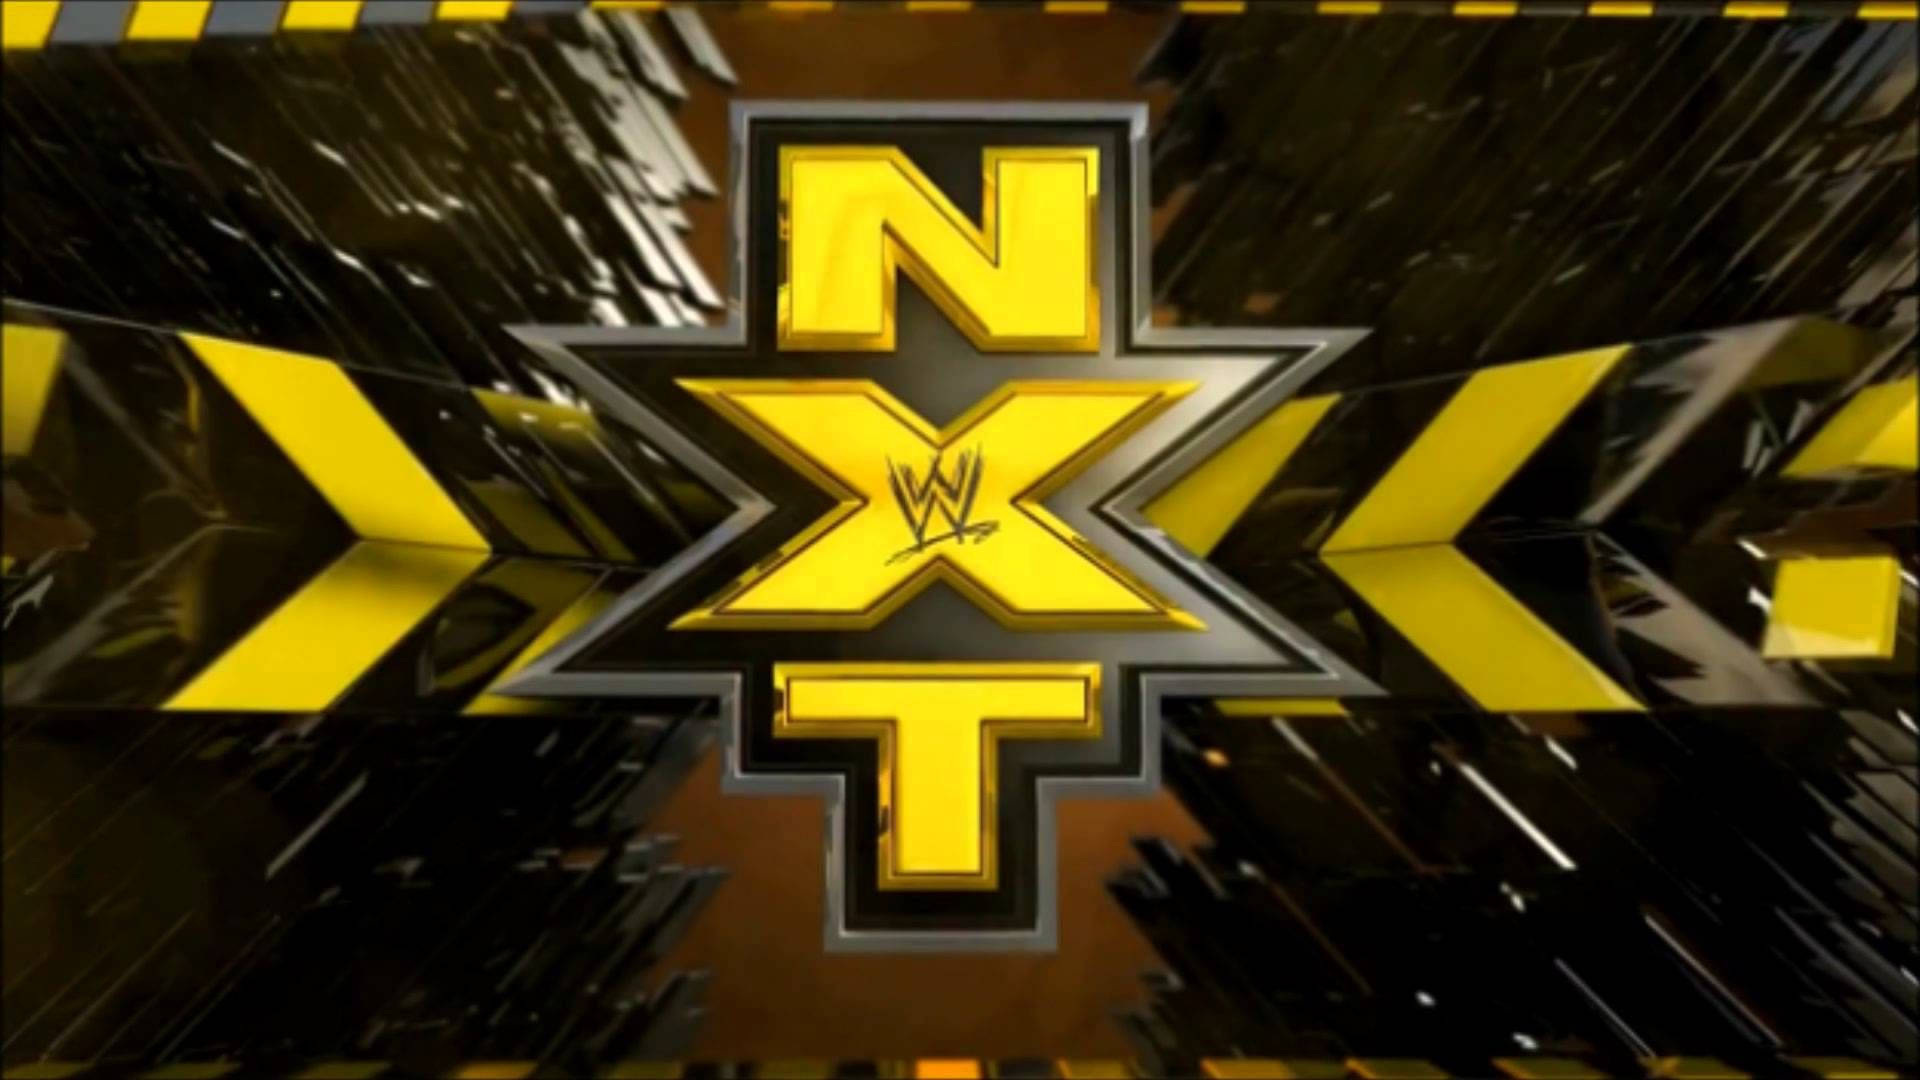 Intense Wwe Nxt Poster In Yellow Theme